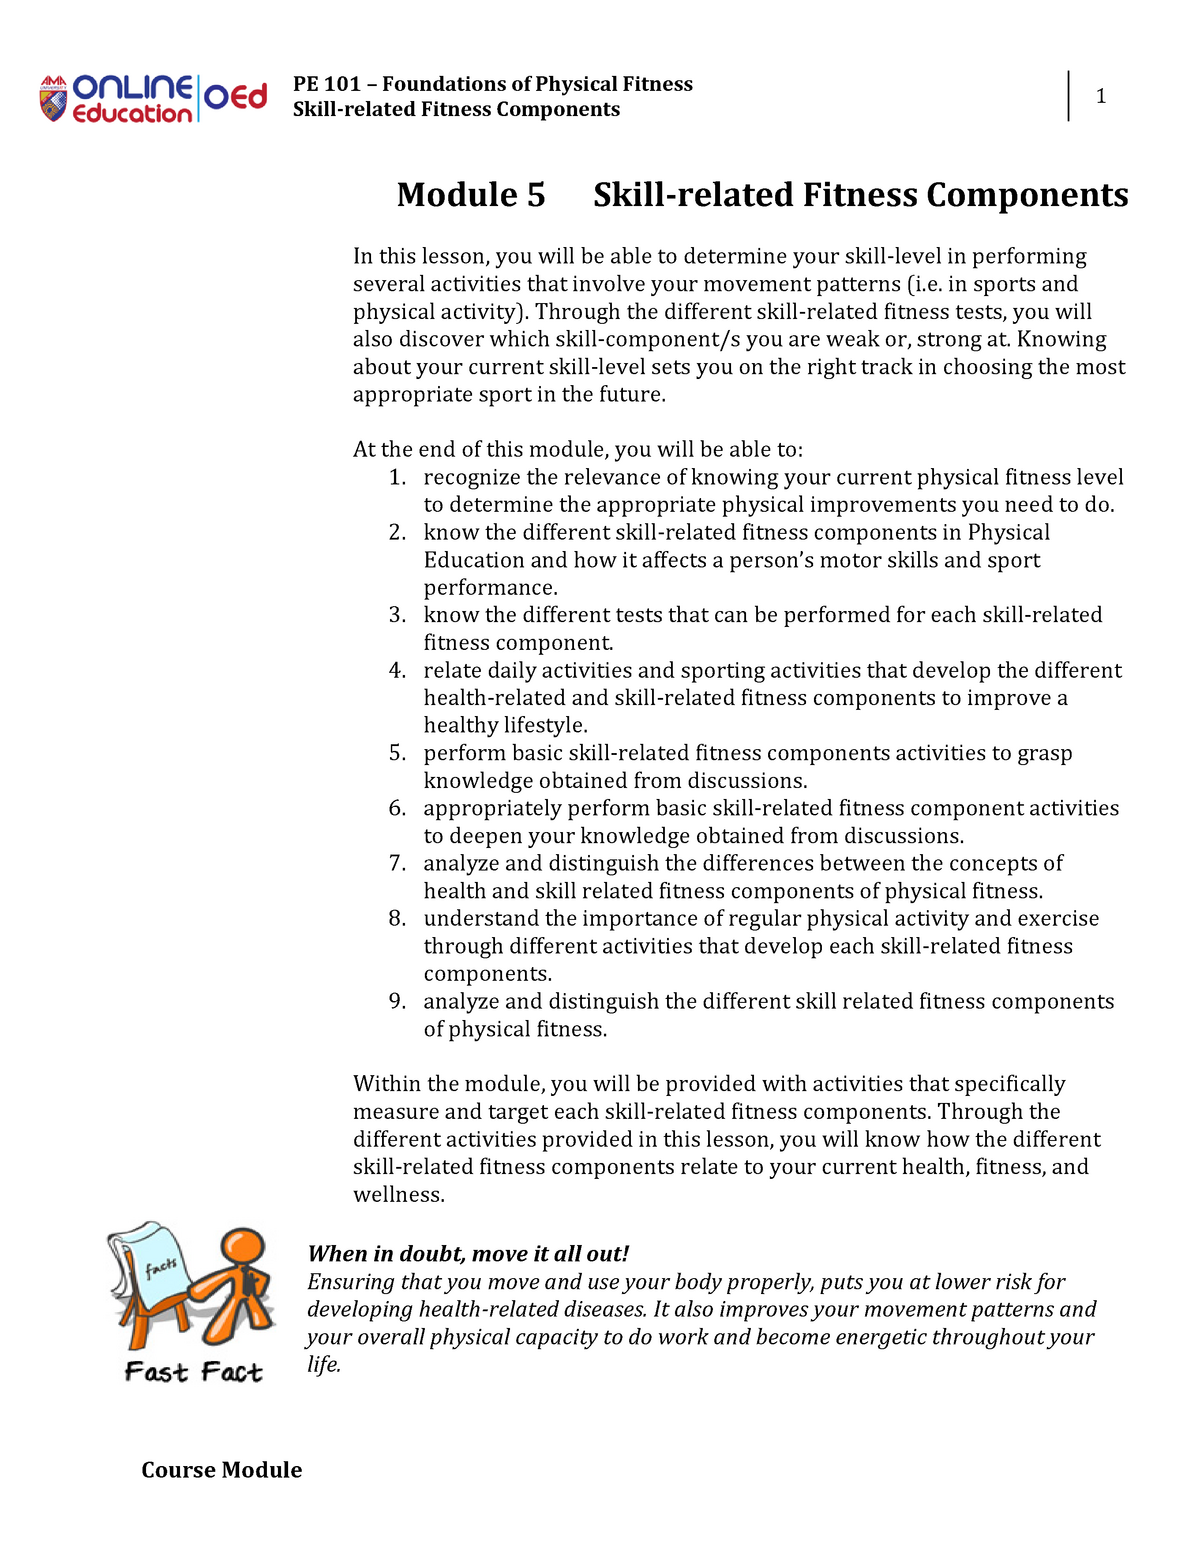 essay about skill related fitness